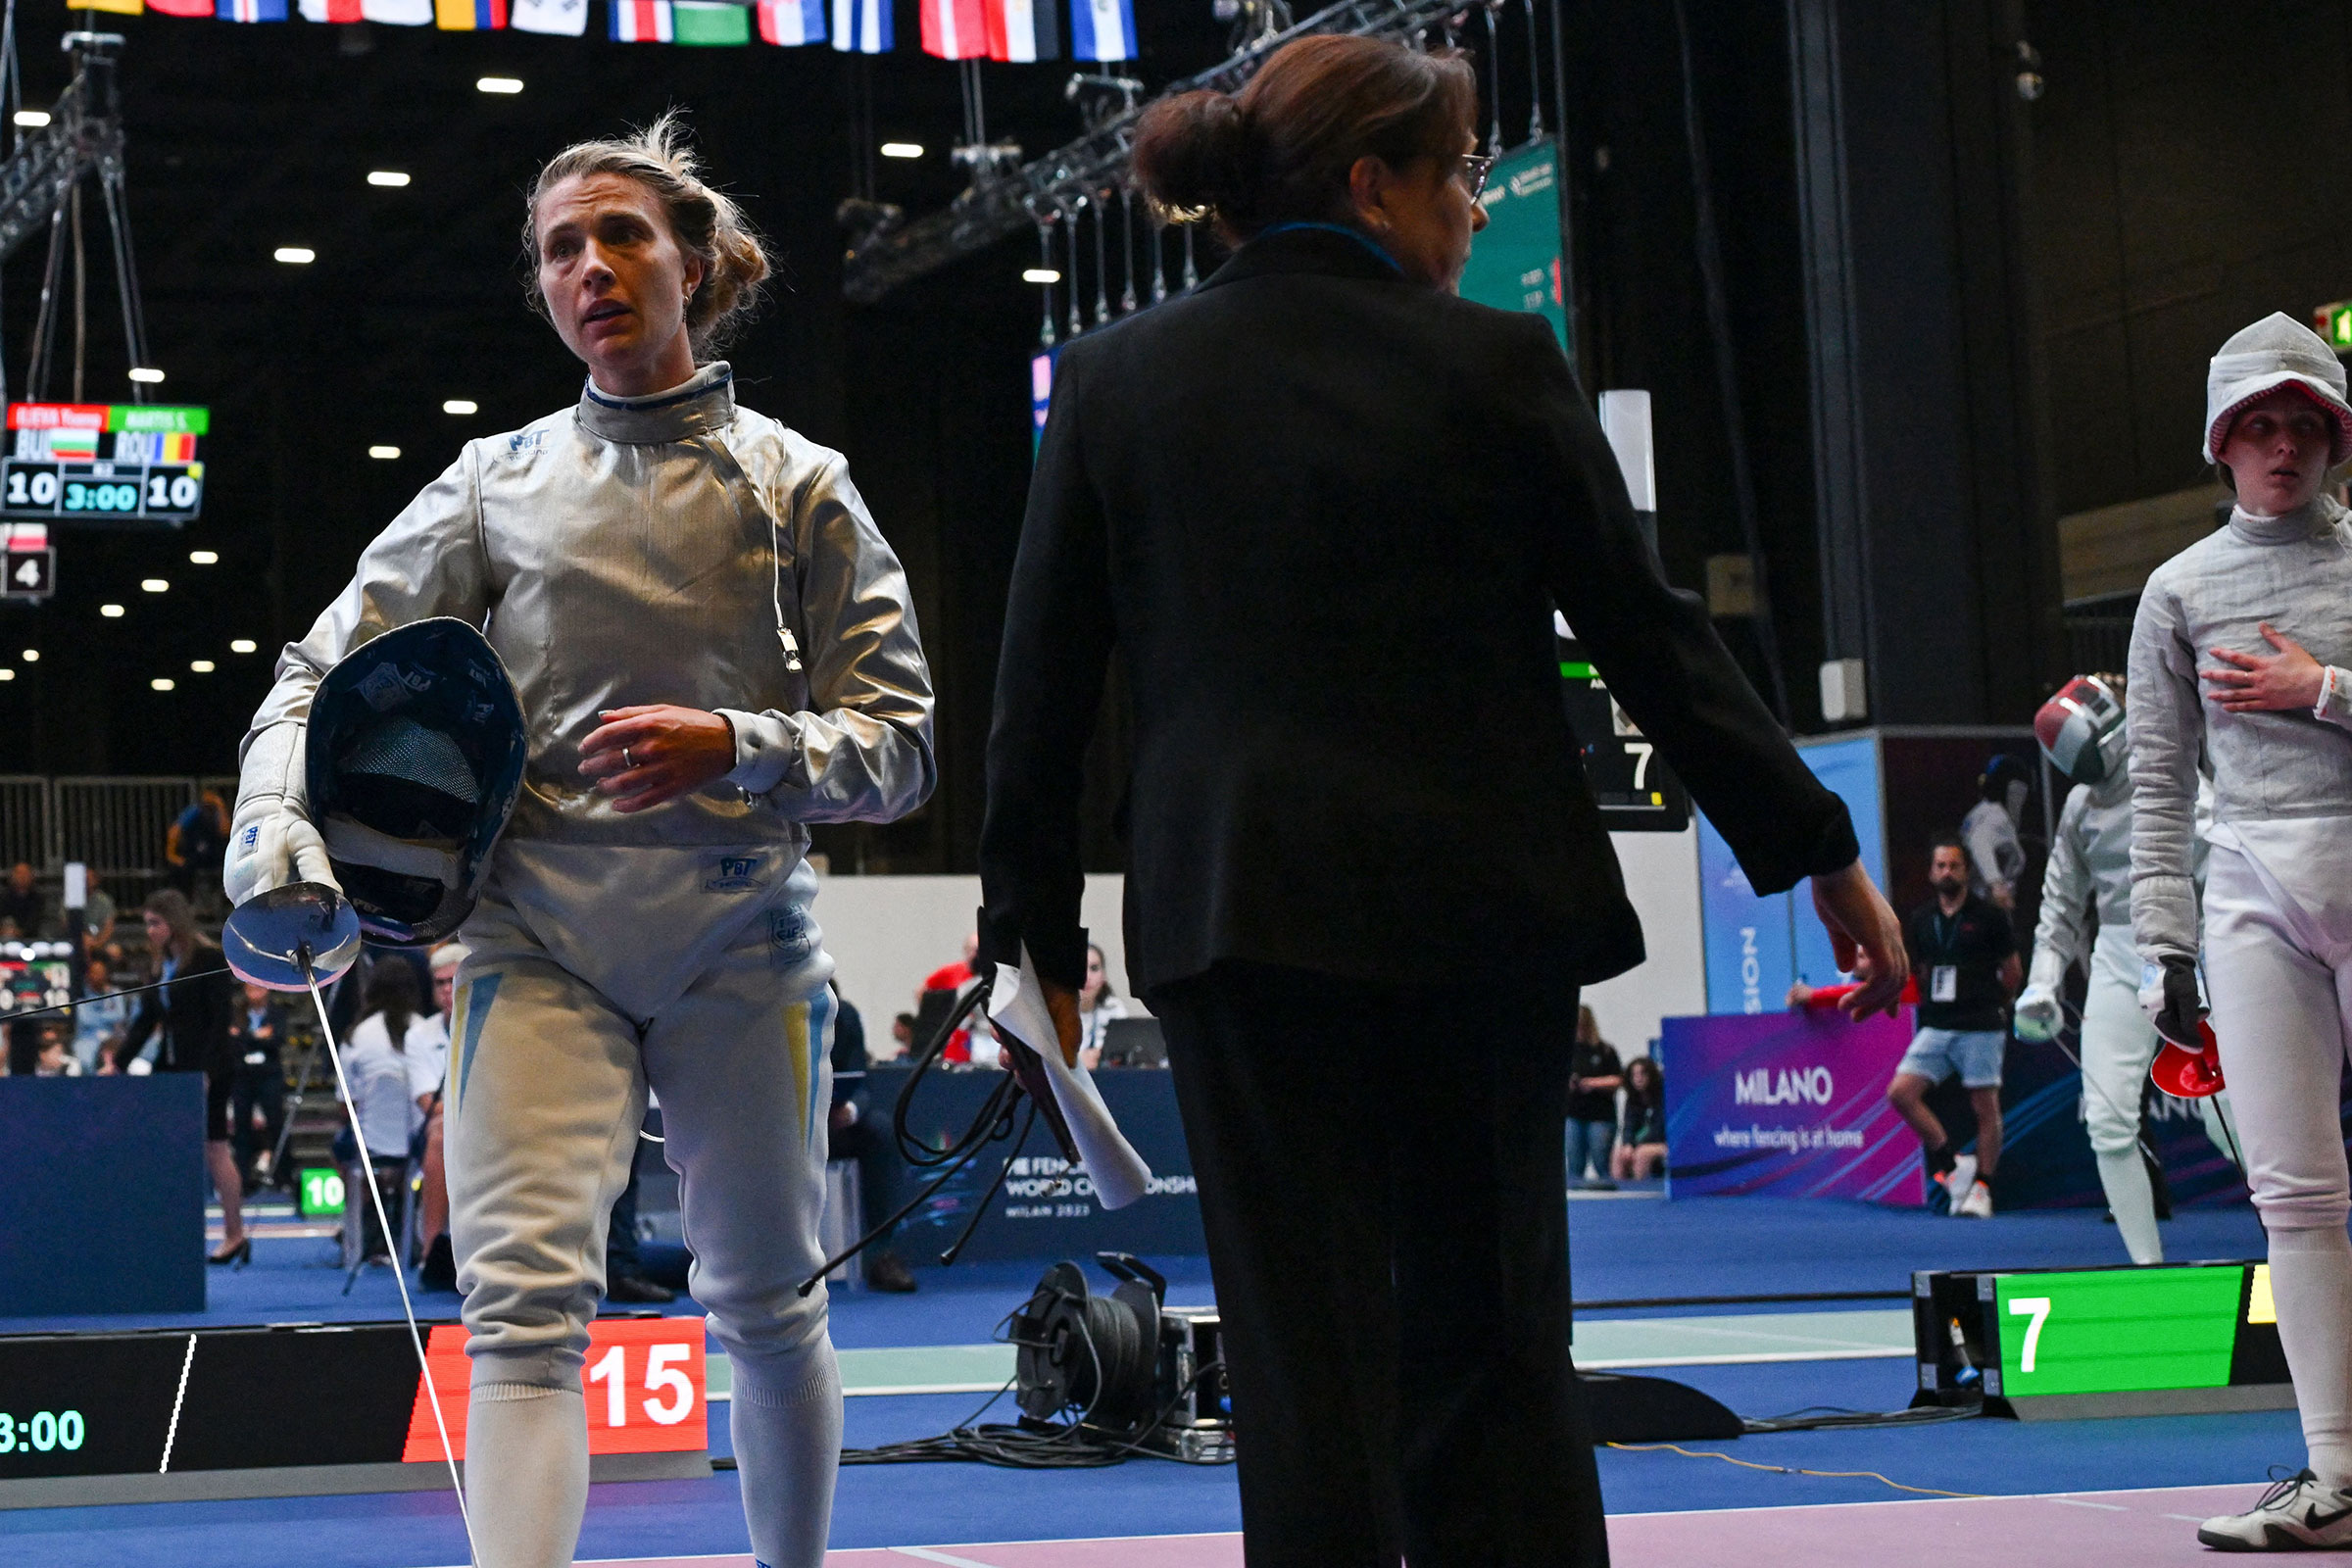 Ukraine's Olga Kharlan leaves the fencing strip after she refused to shake hands with Russia's Anna Smirnova, registered as an Individual Neutral Athlete (AIN), after Kharlan defeated Smirnova during the Sabre Women's Senior Individual qualifiers, as part of the FIE Fencing World Championships at the Fair Allianz MI.CO (Milano Convegni) in Milan, on July 27, 2023.